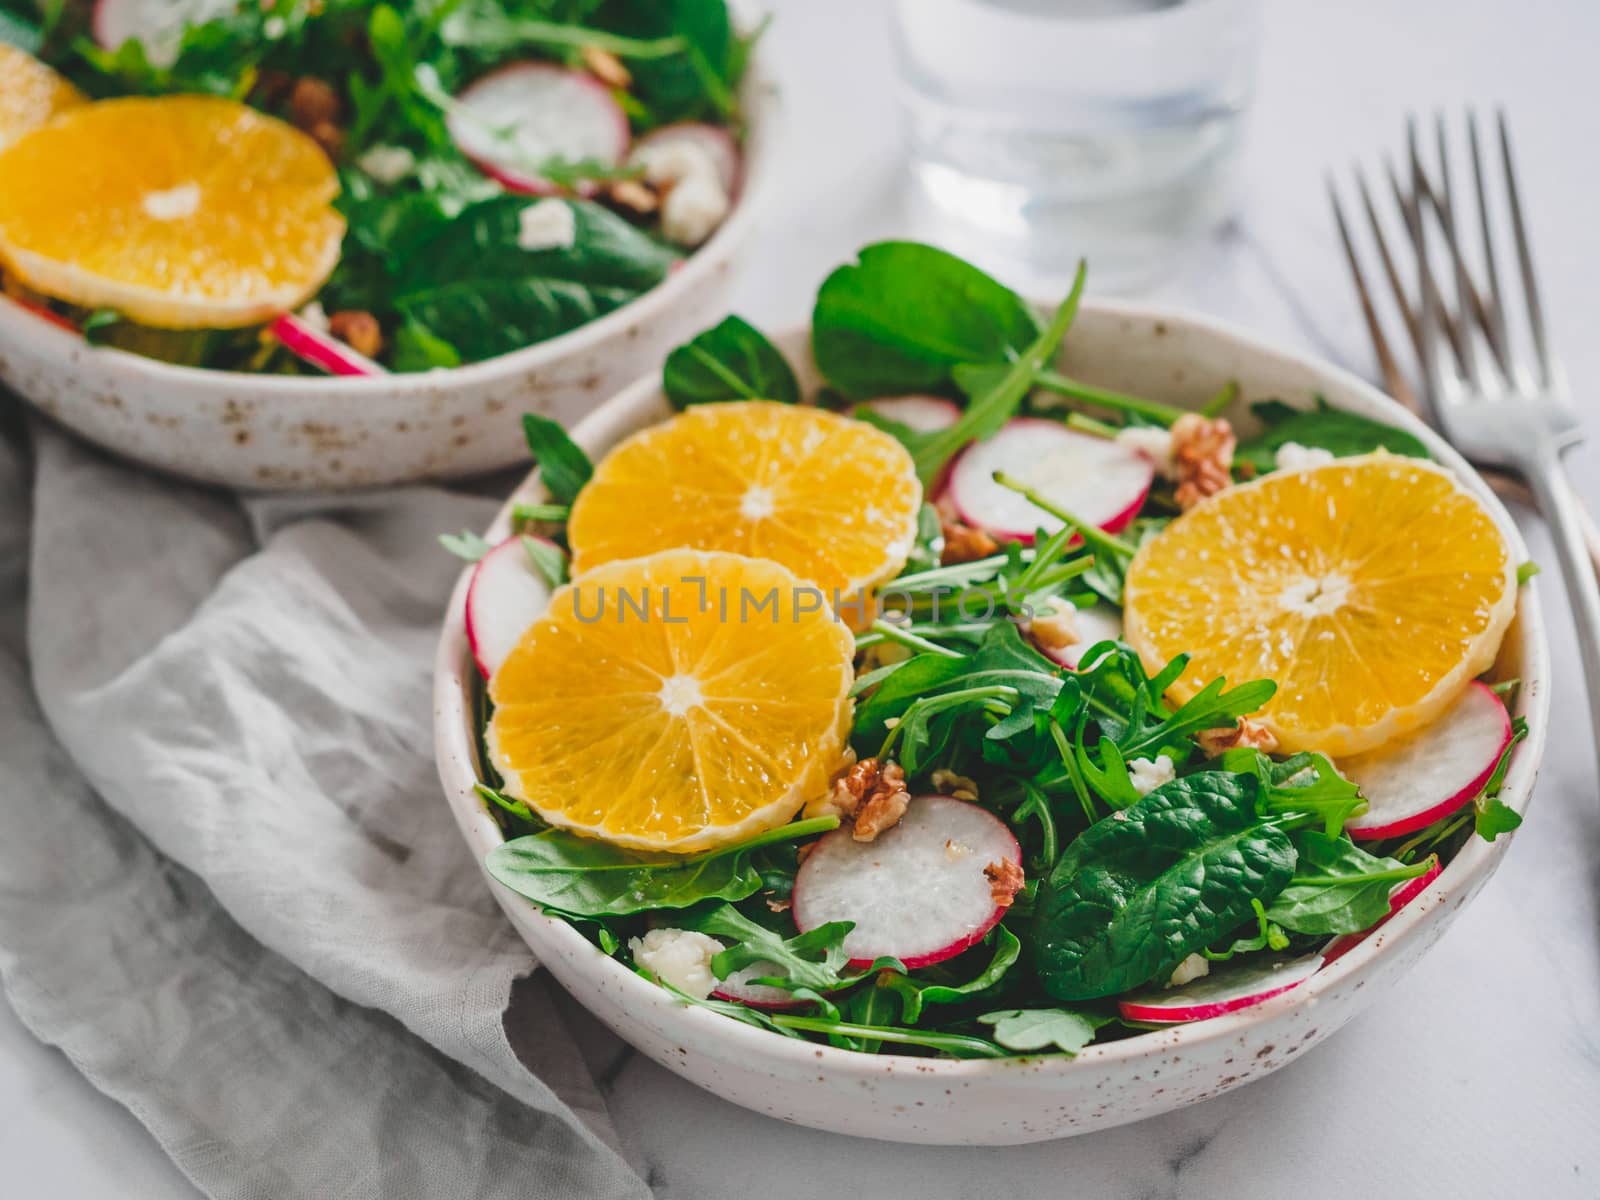 Vegan salad bowl with oranges, spinach, arugula, radish, nut. Top view. Vegan breakfast, vegetarian food, diet concept. Two bowls with salad on white marble tabletop